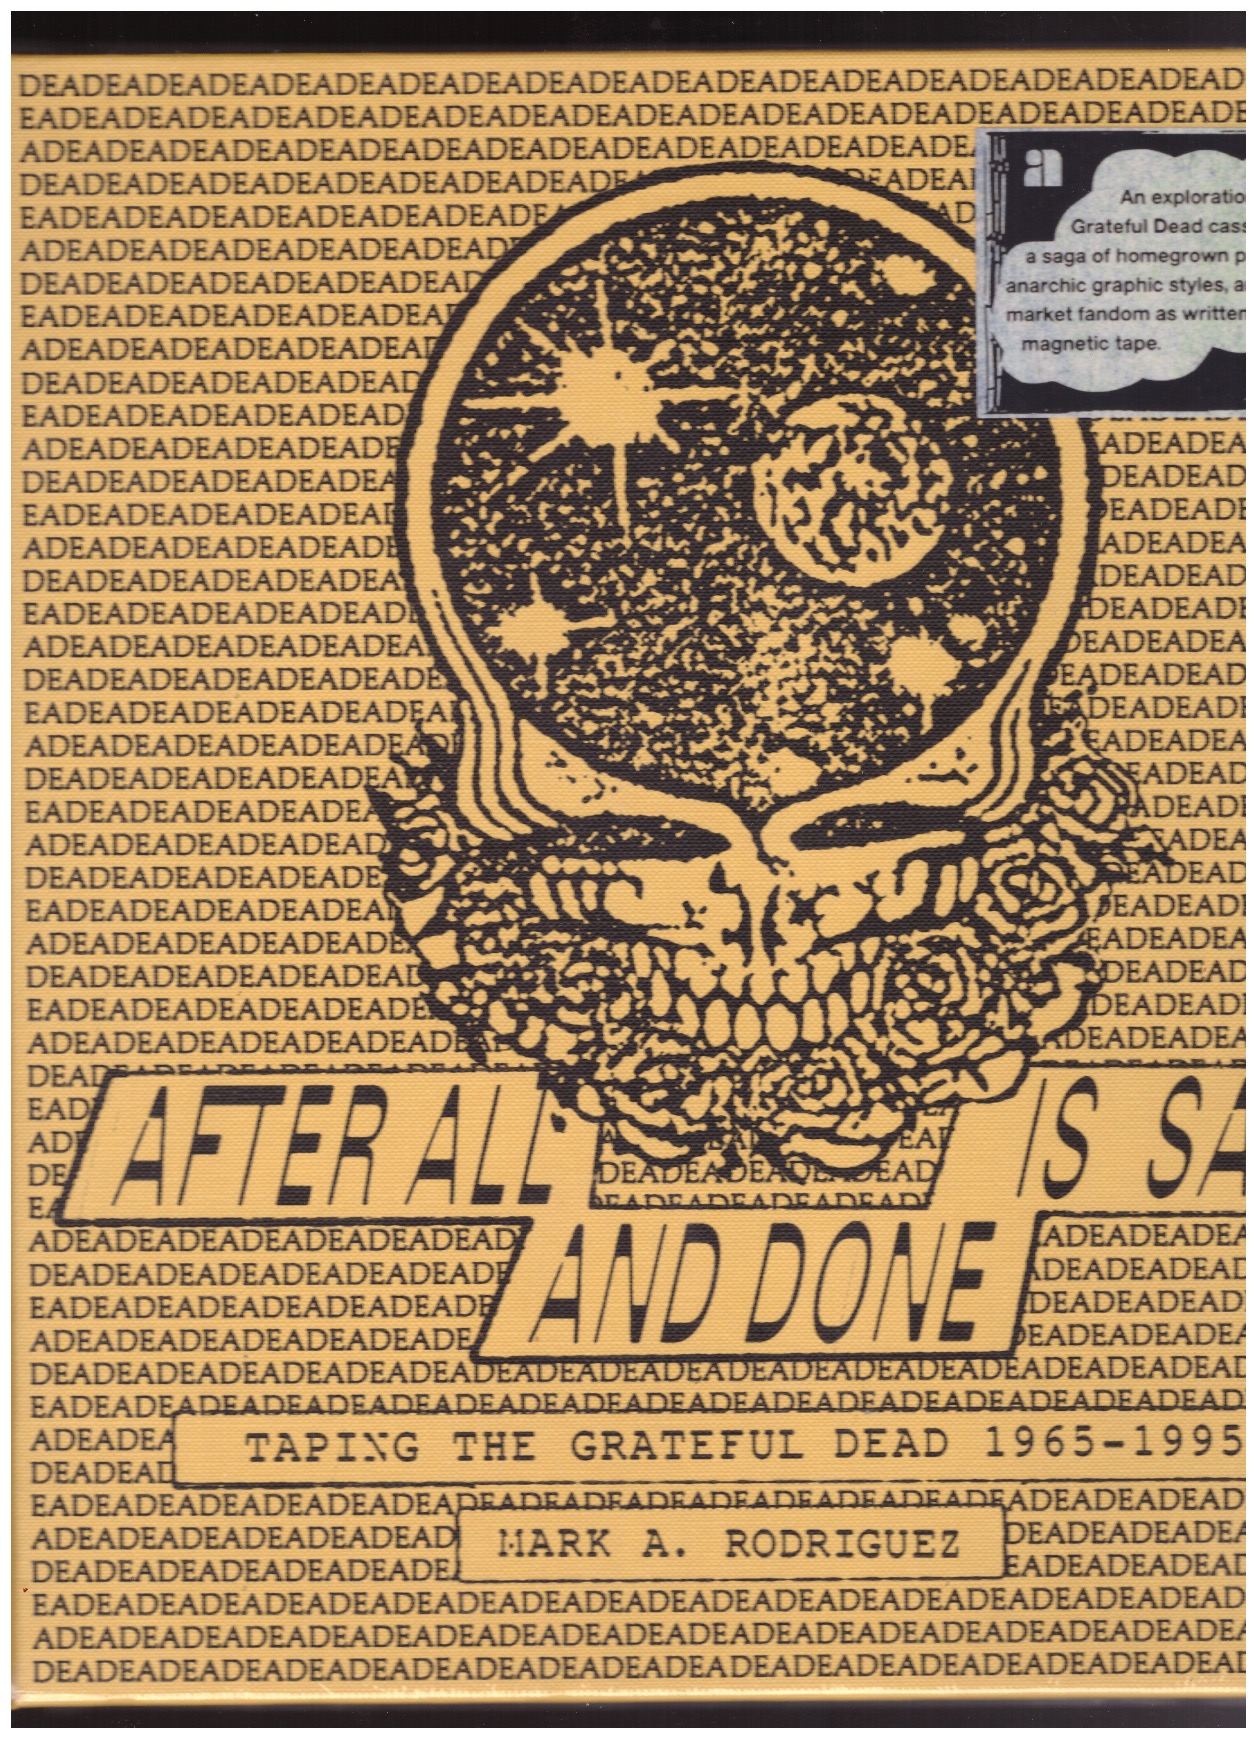 RODRIGUEZ, Mark A. - After All is Said and Done: Taping the Grateful Dead, 1965-1995